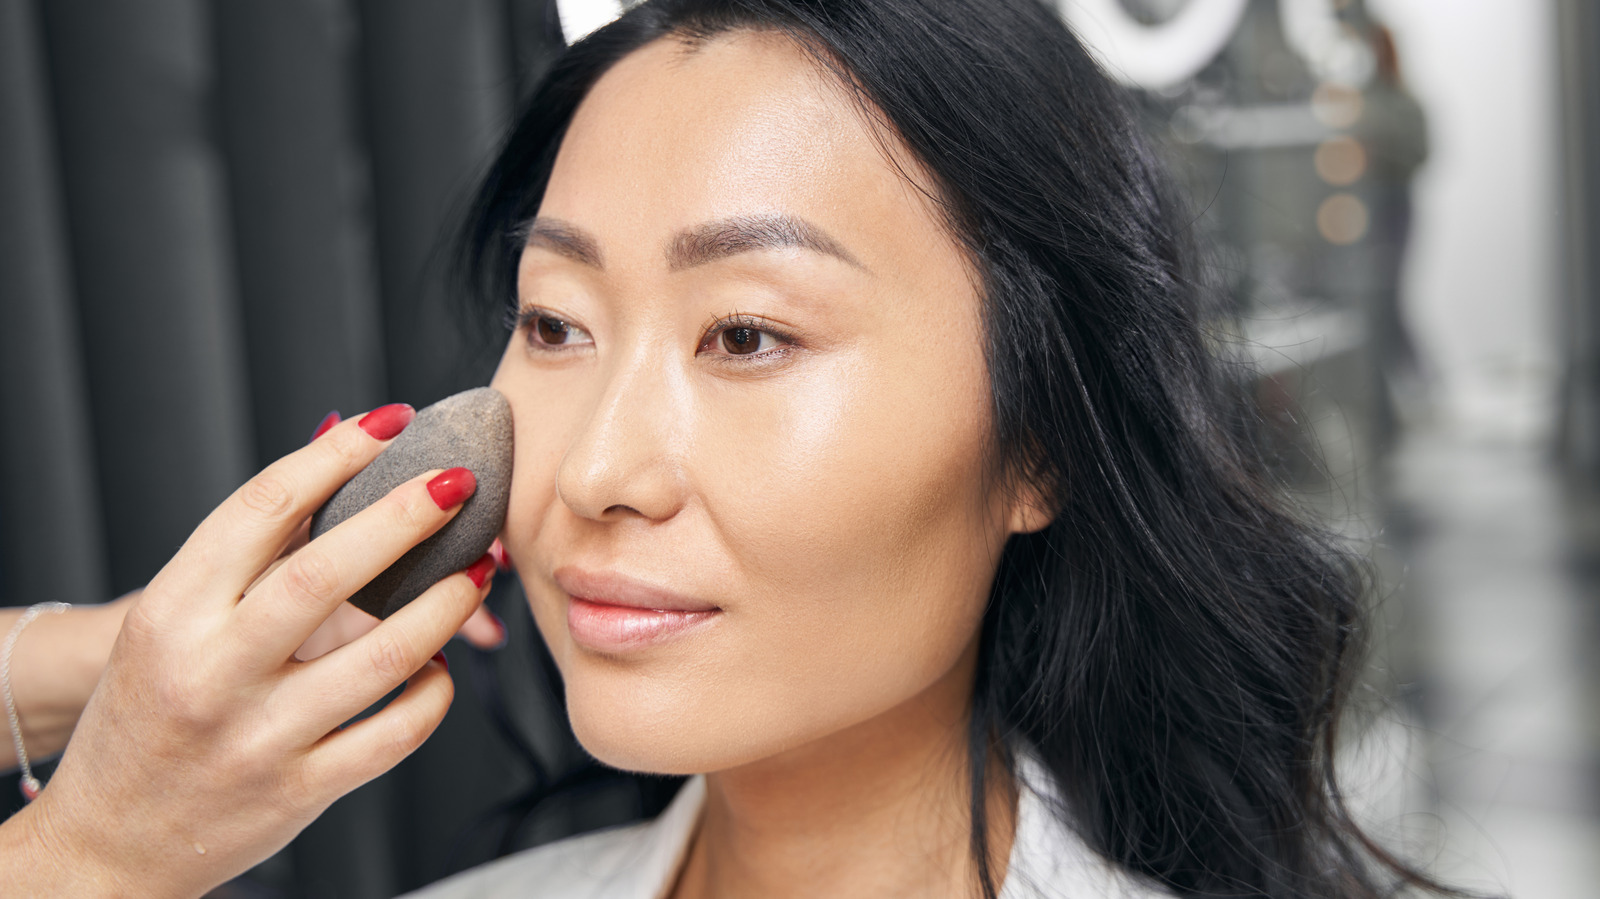 The 10 Best Skin Tints To Enhance Your Look Without Heavy Coverage